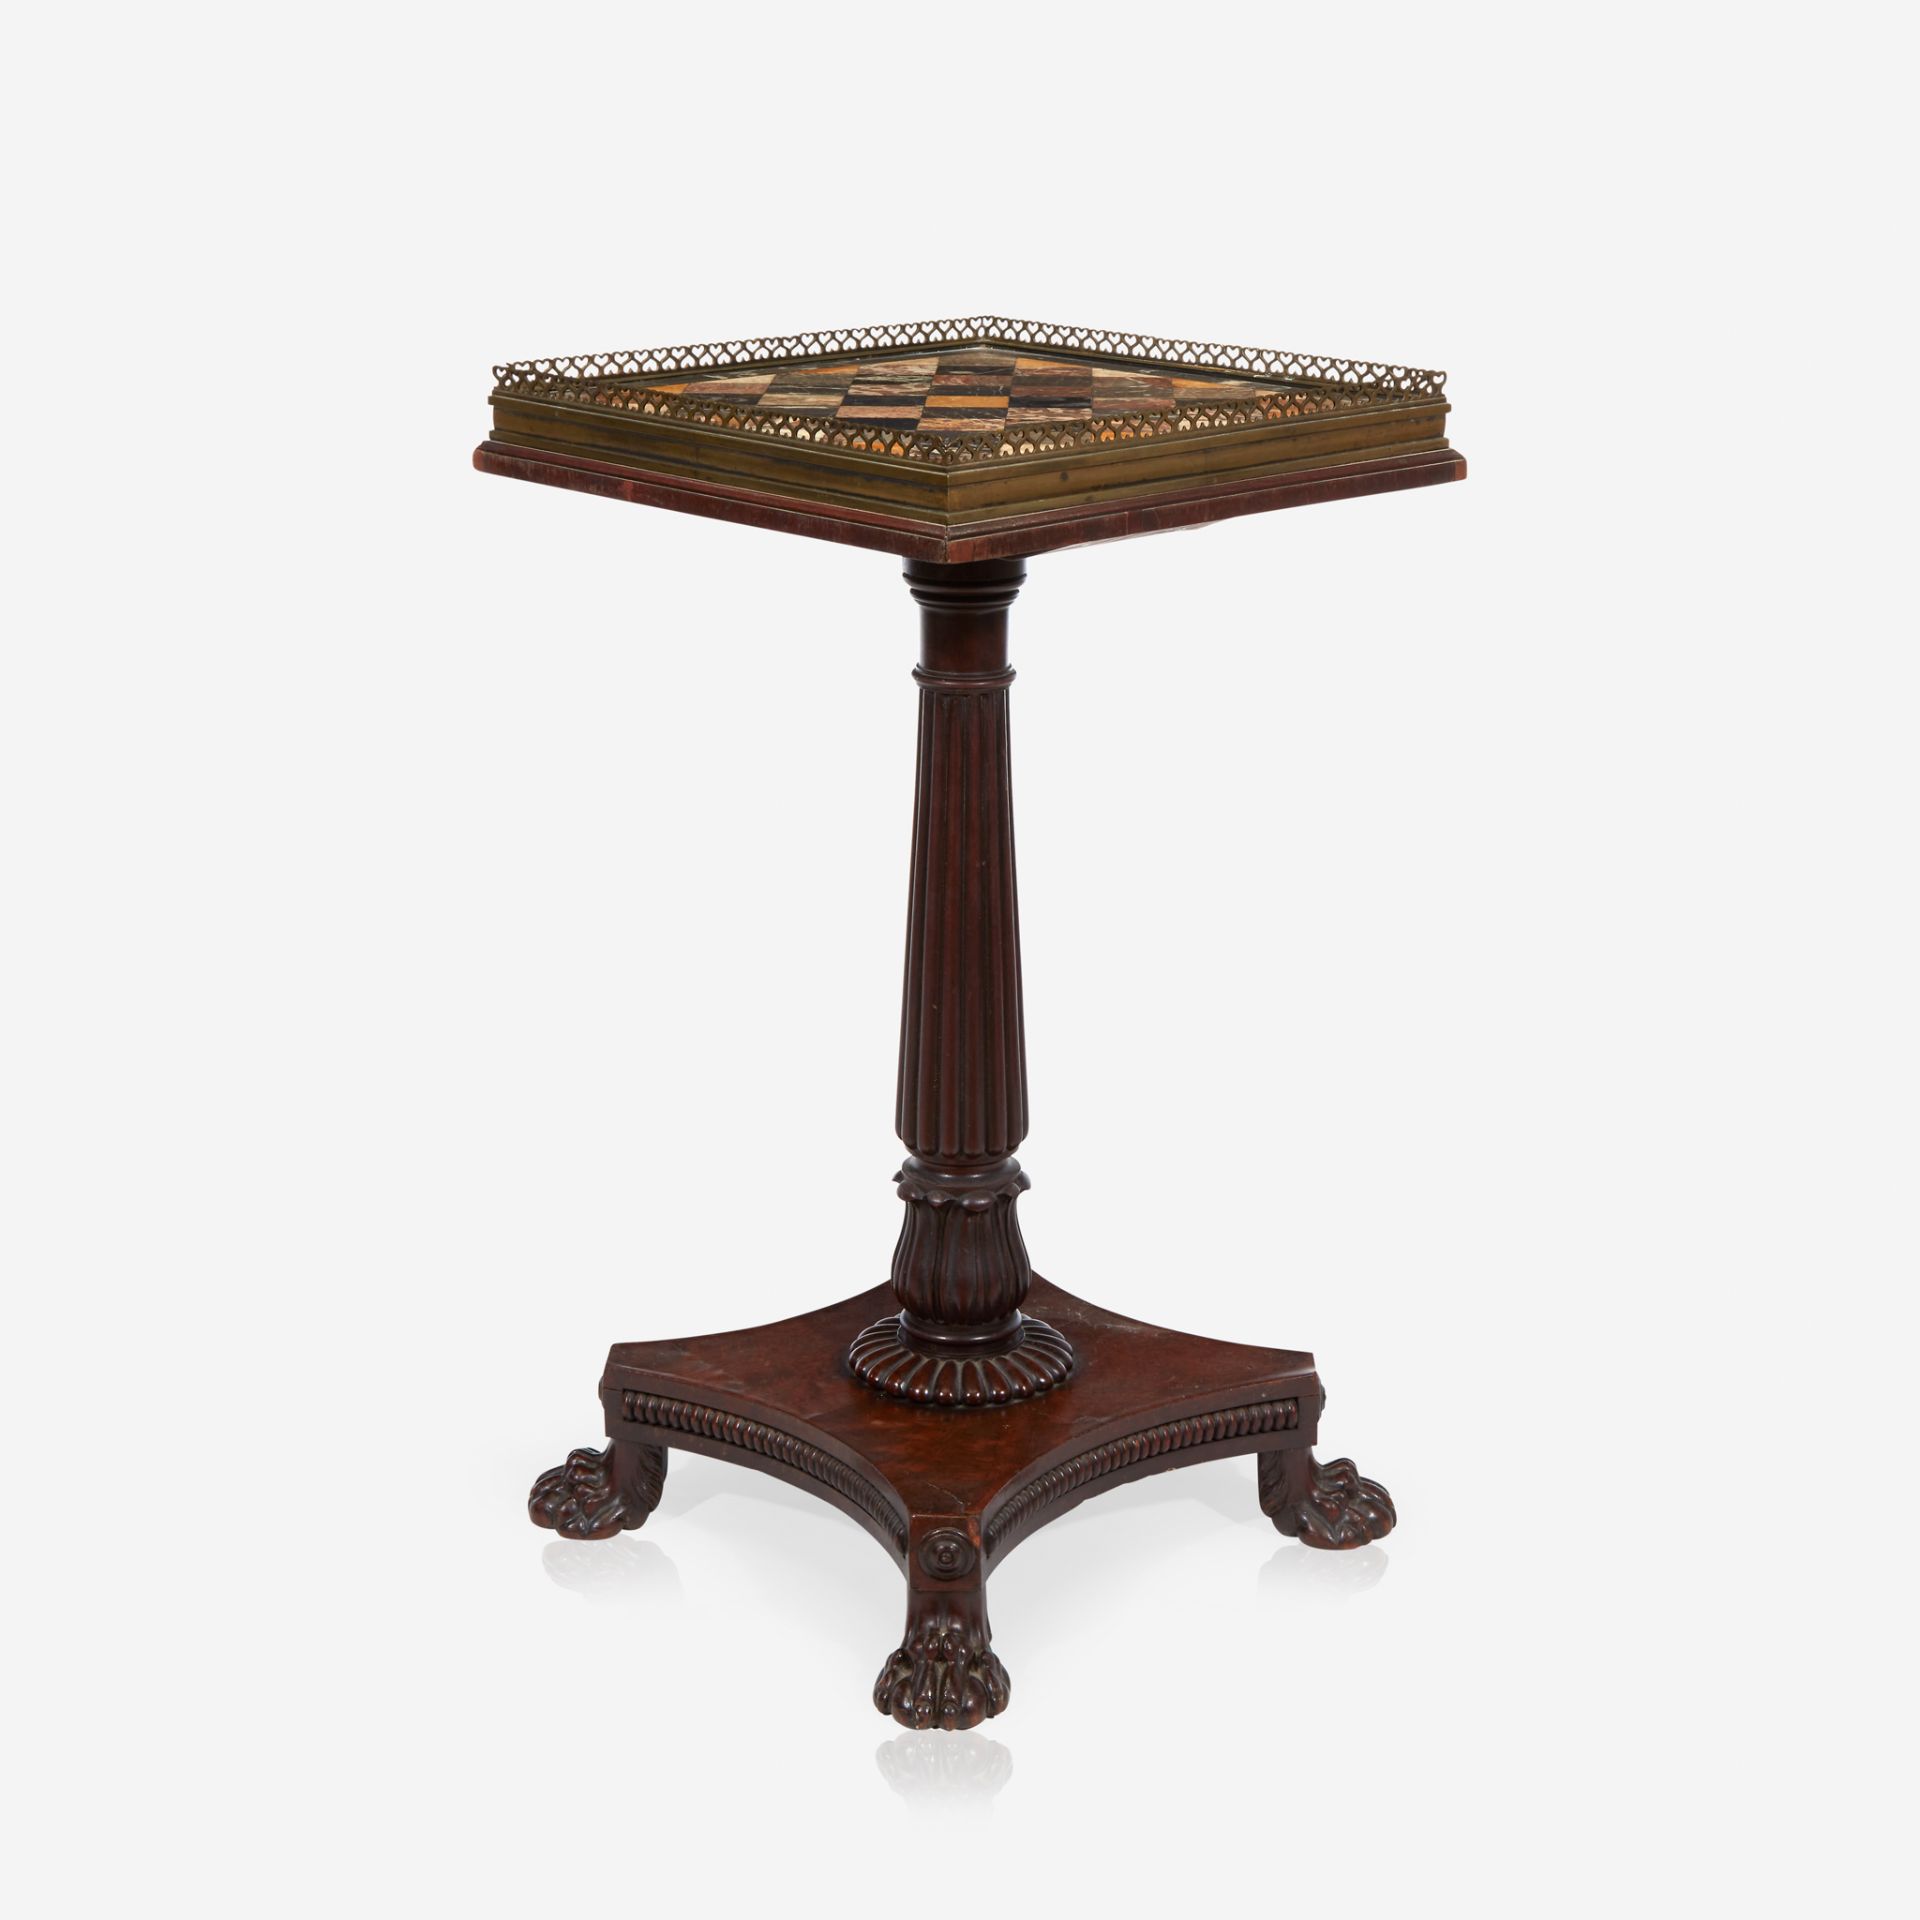 A Regency brass-mounted mahogany and specimen marble side table in the manner of Gillows, First quar